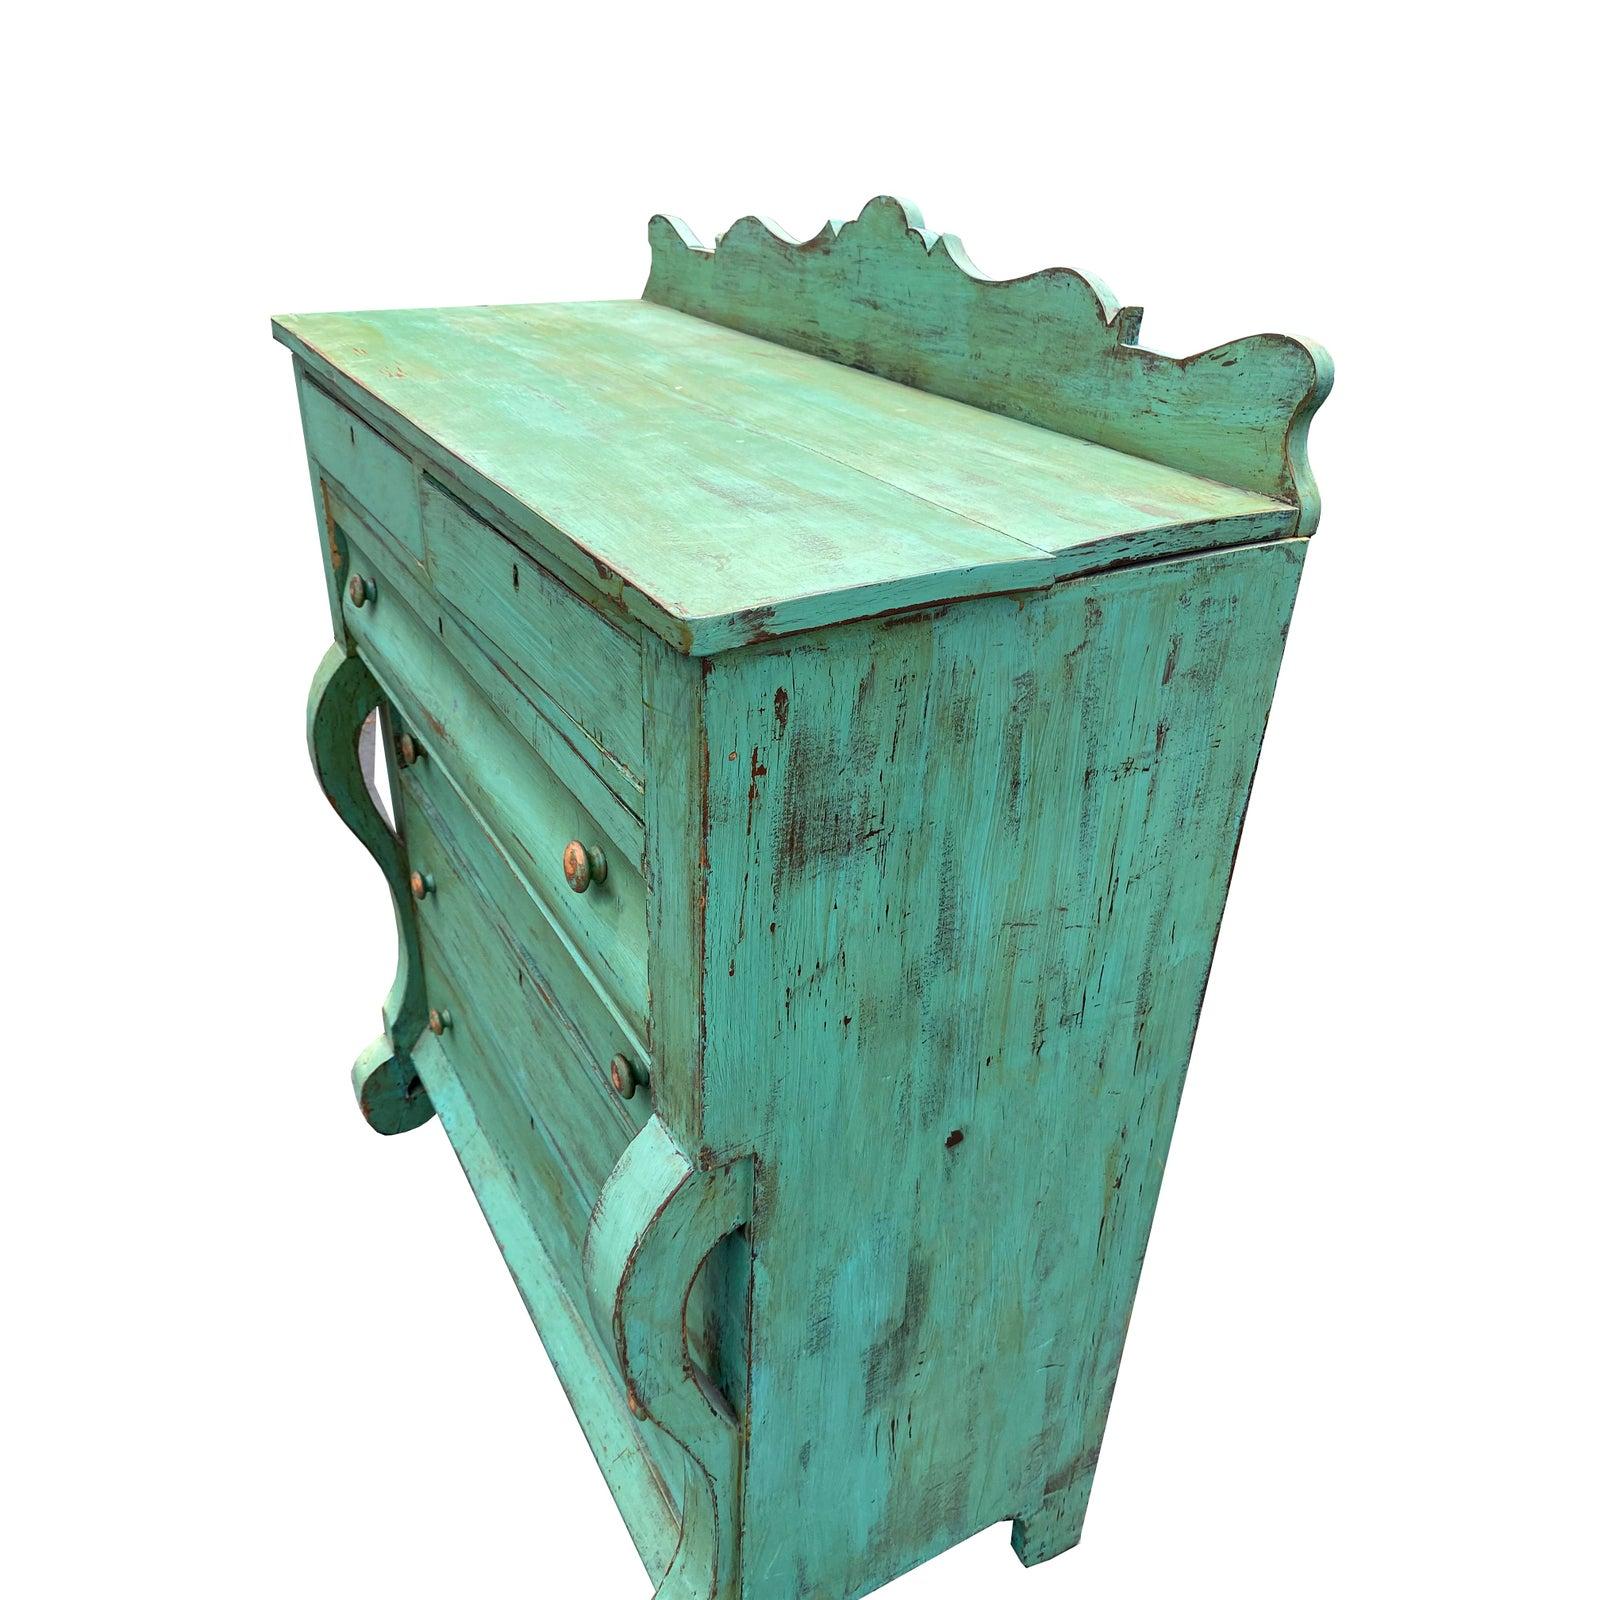 A playful, chic late 19th century American highboy dresser, distressed in a green and brown paint blend for a colorful pop. Dresser is fragile but in good condition overall. Height before backplate is 45.5